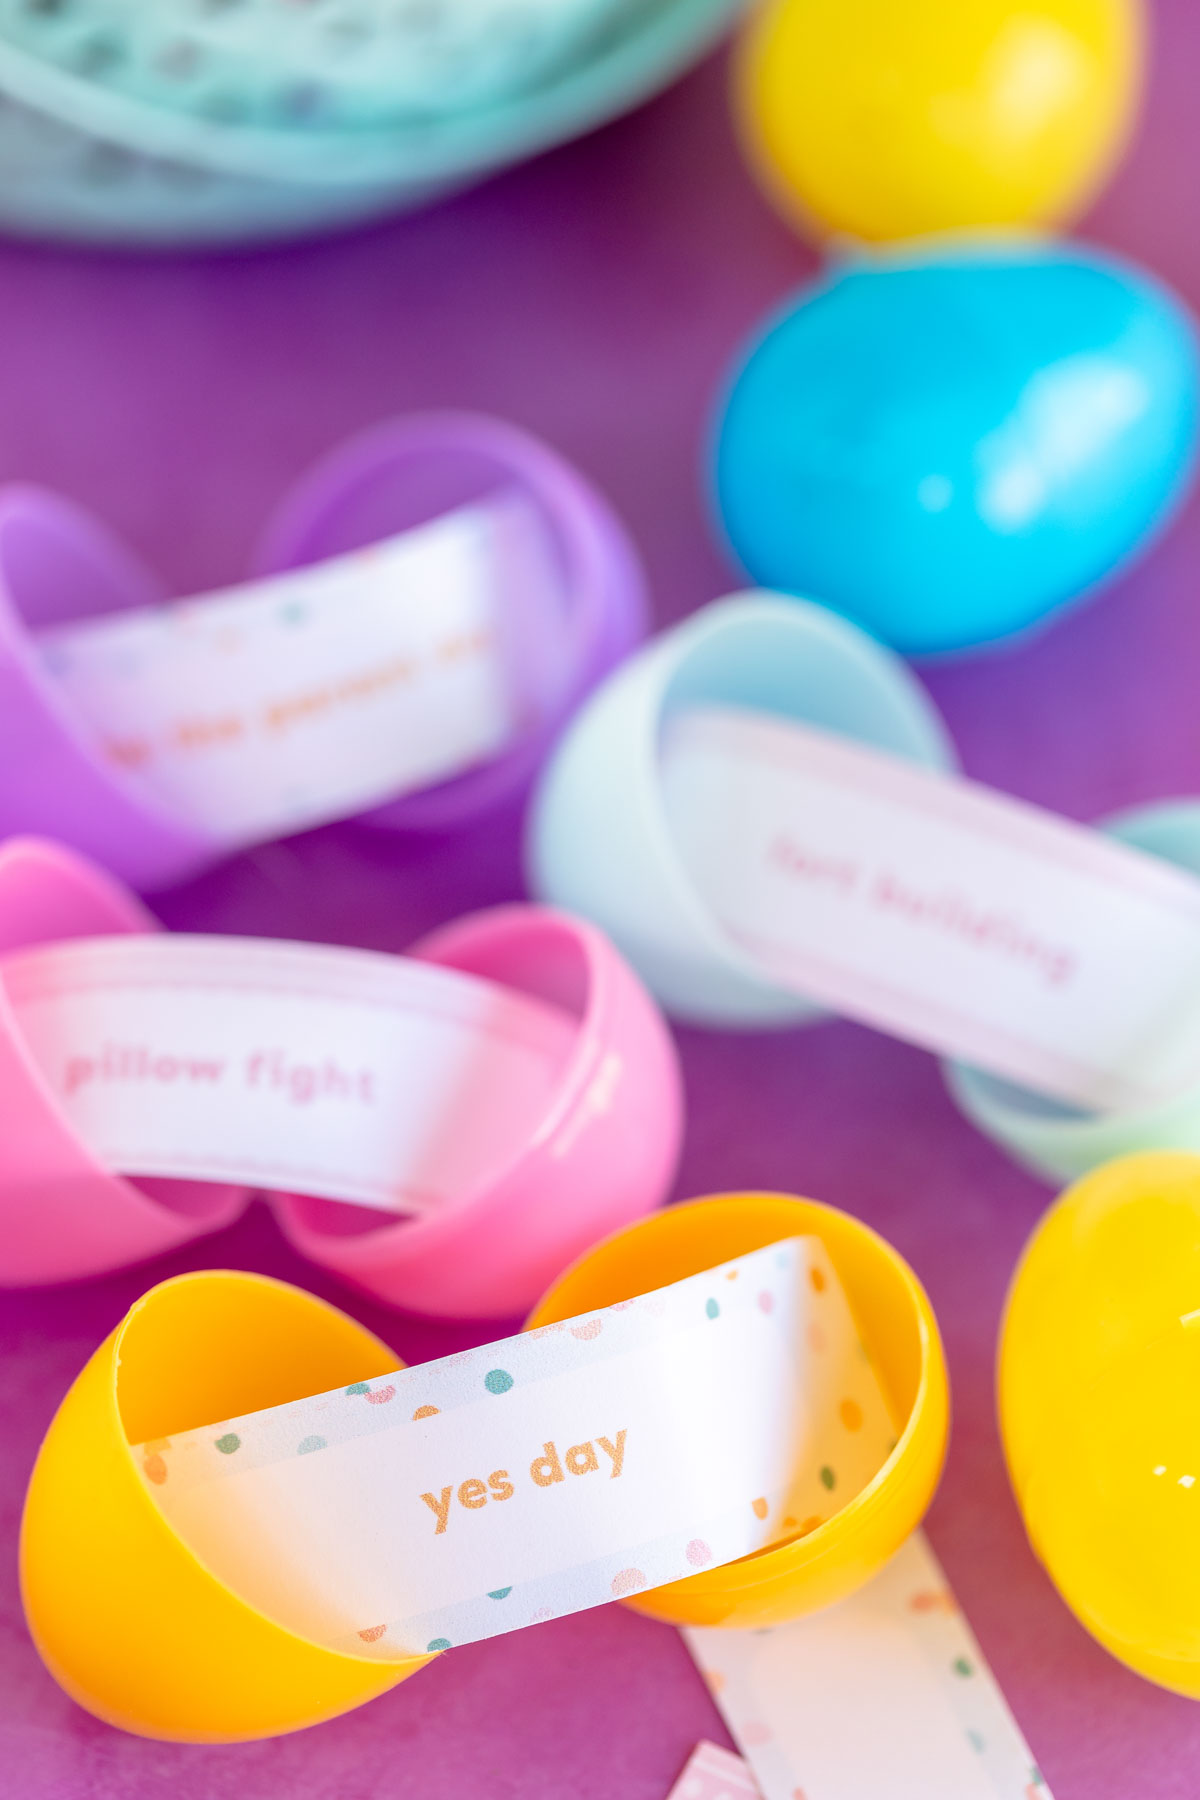 Easter eggs filled with rewards